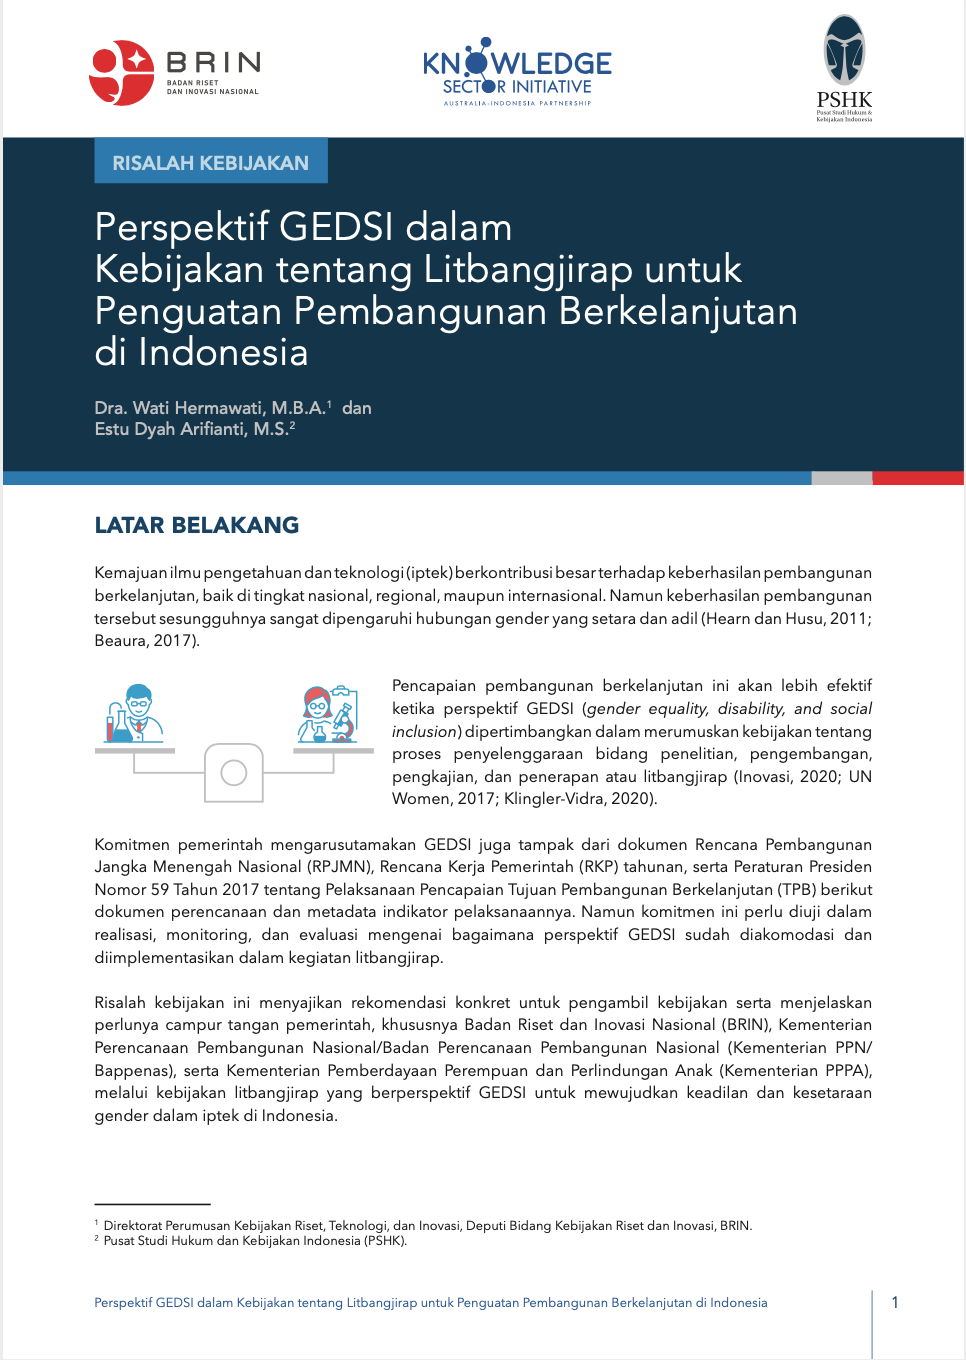 GEDSI Perspectives in Policy on Research, Development, Assessment, and Application (Litbangjirap) to Strengthen Sustainable Development in Indonesia